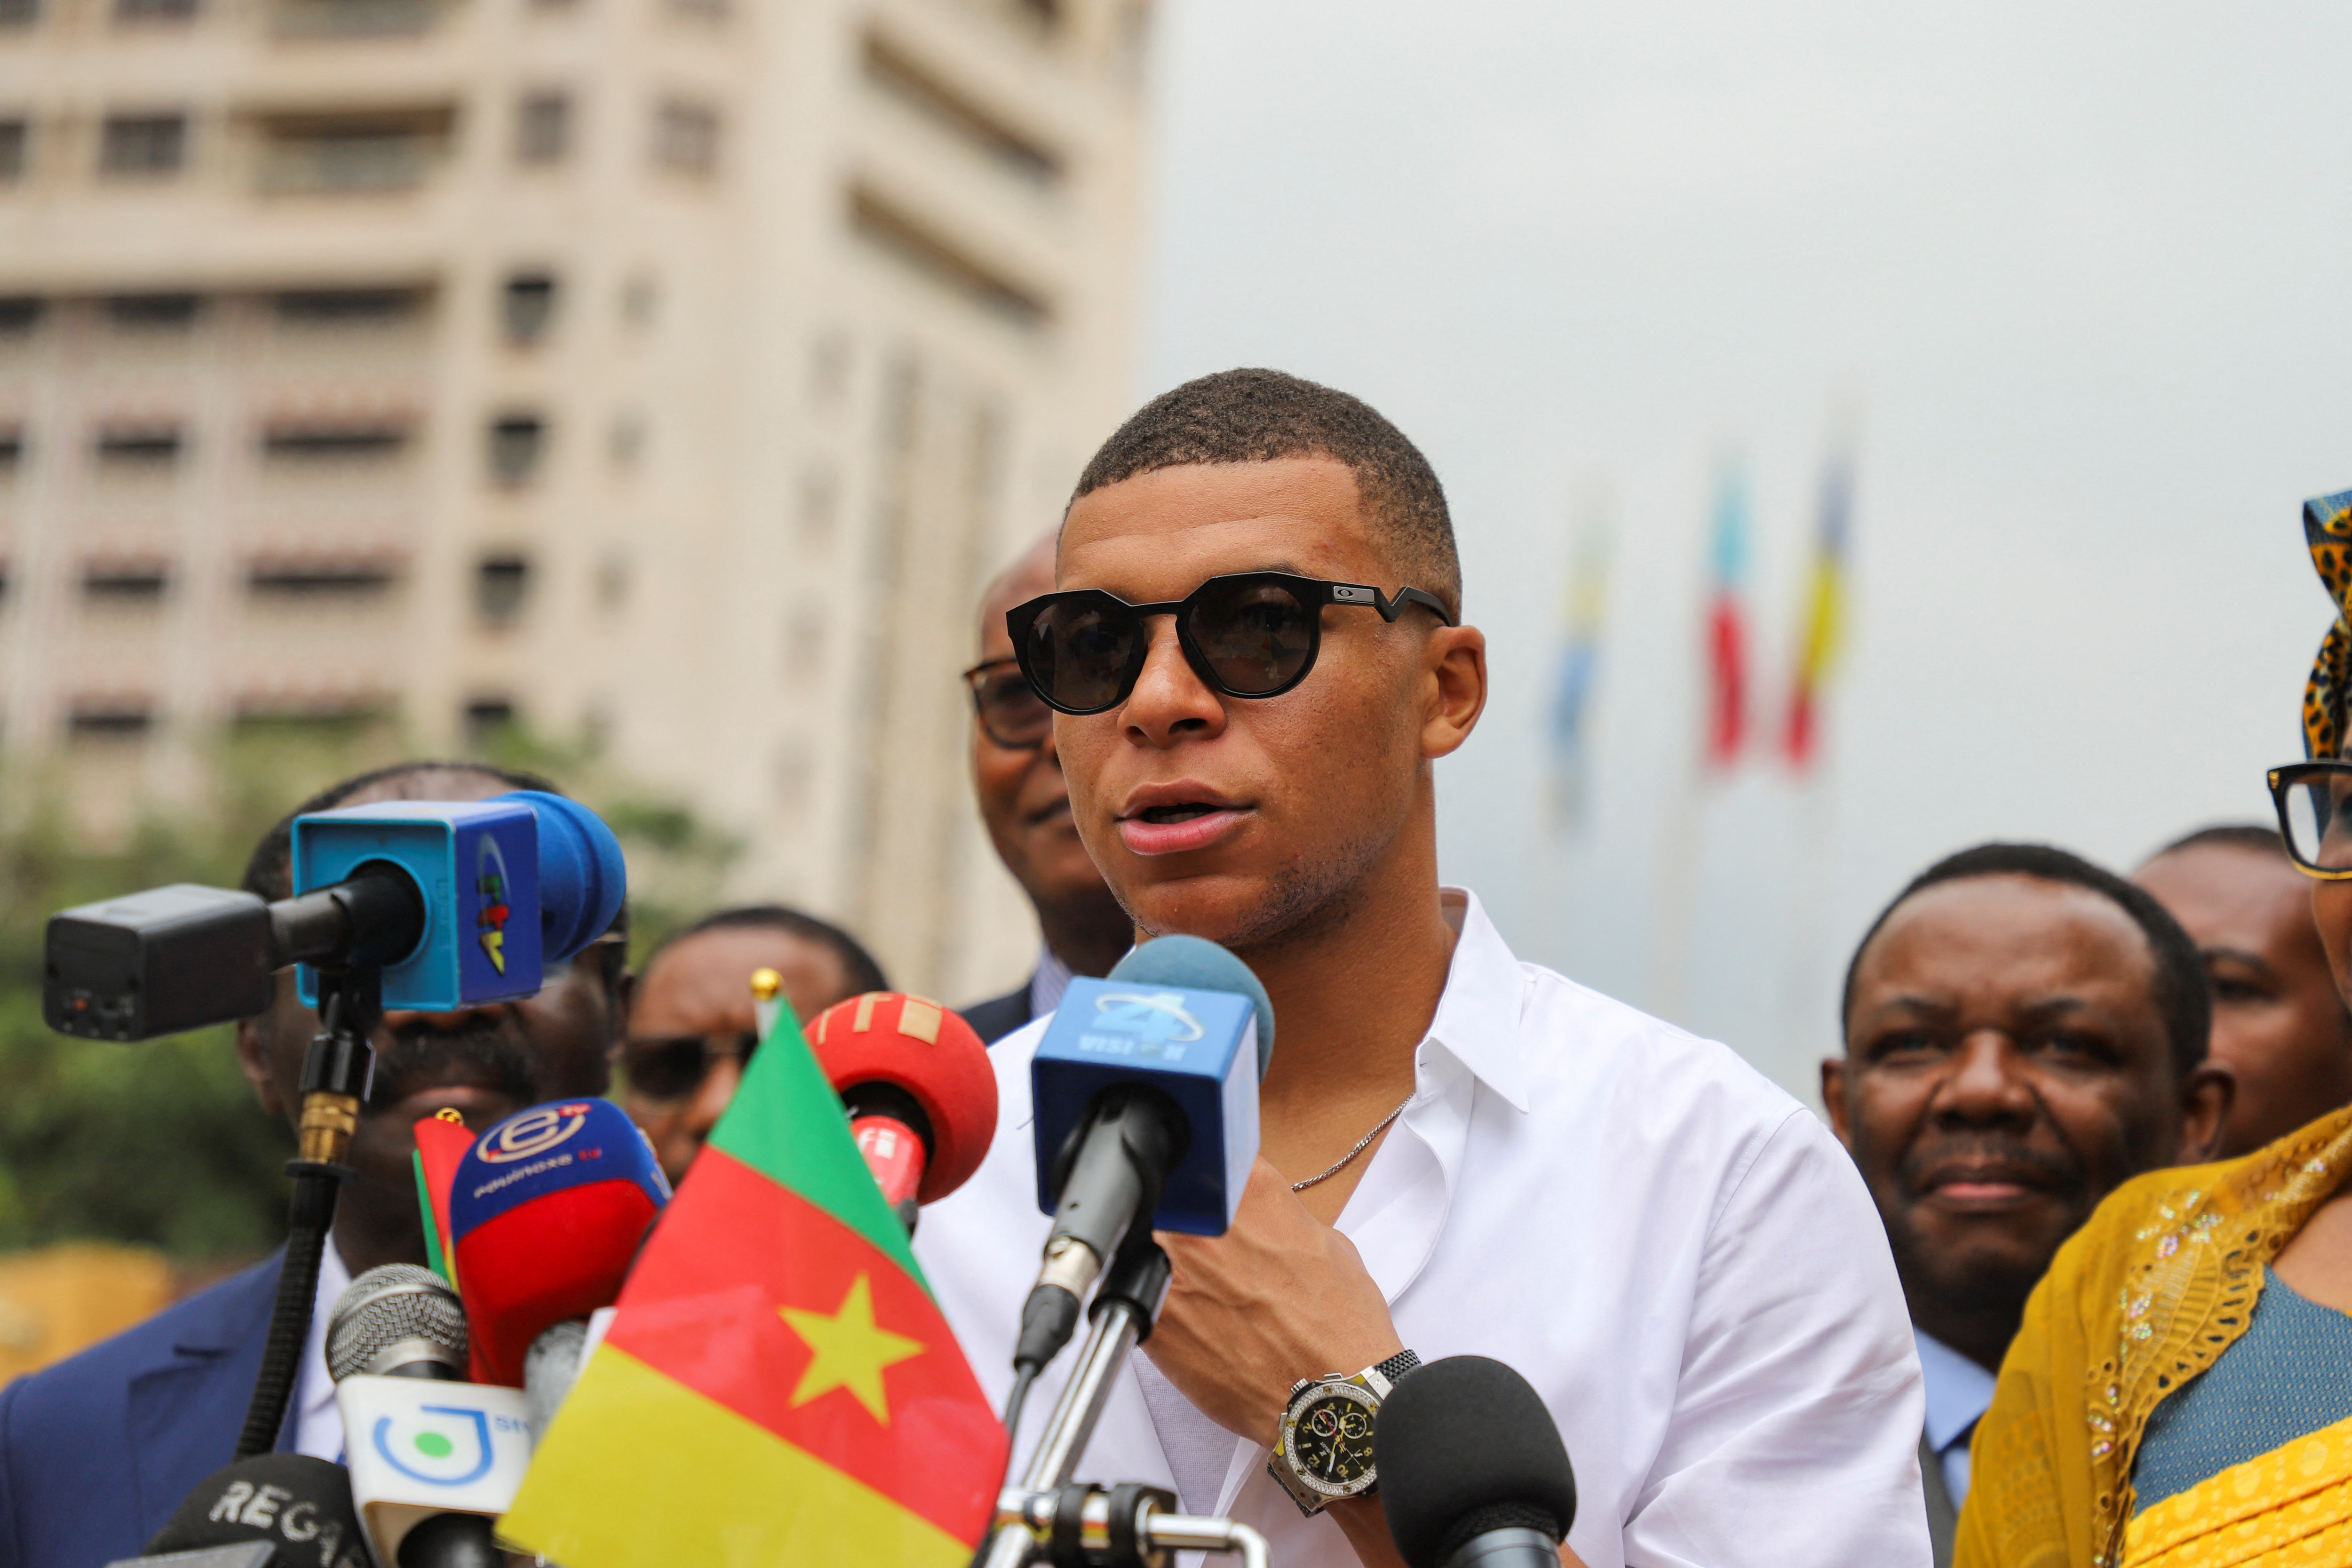 Soccer star Mbappe continues tour of his father's native homeland in Cameroon